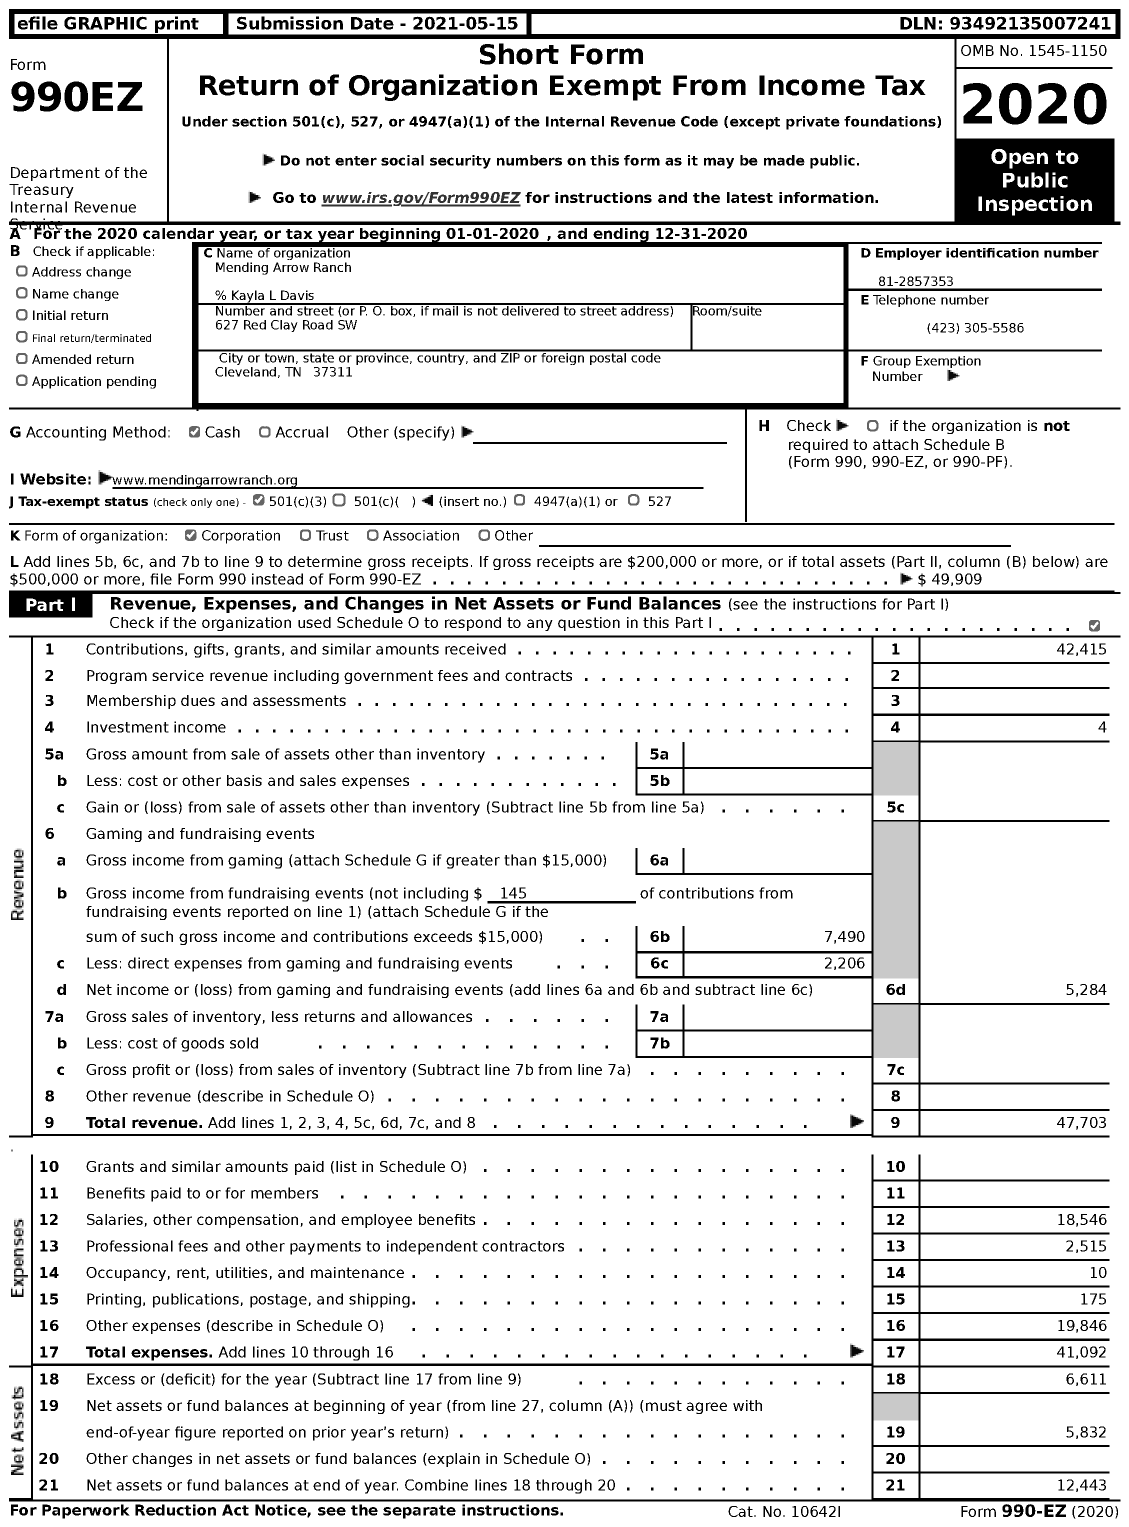 Image of first page of 2020 Form 990EZ for Mending Arrow Ranch